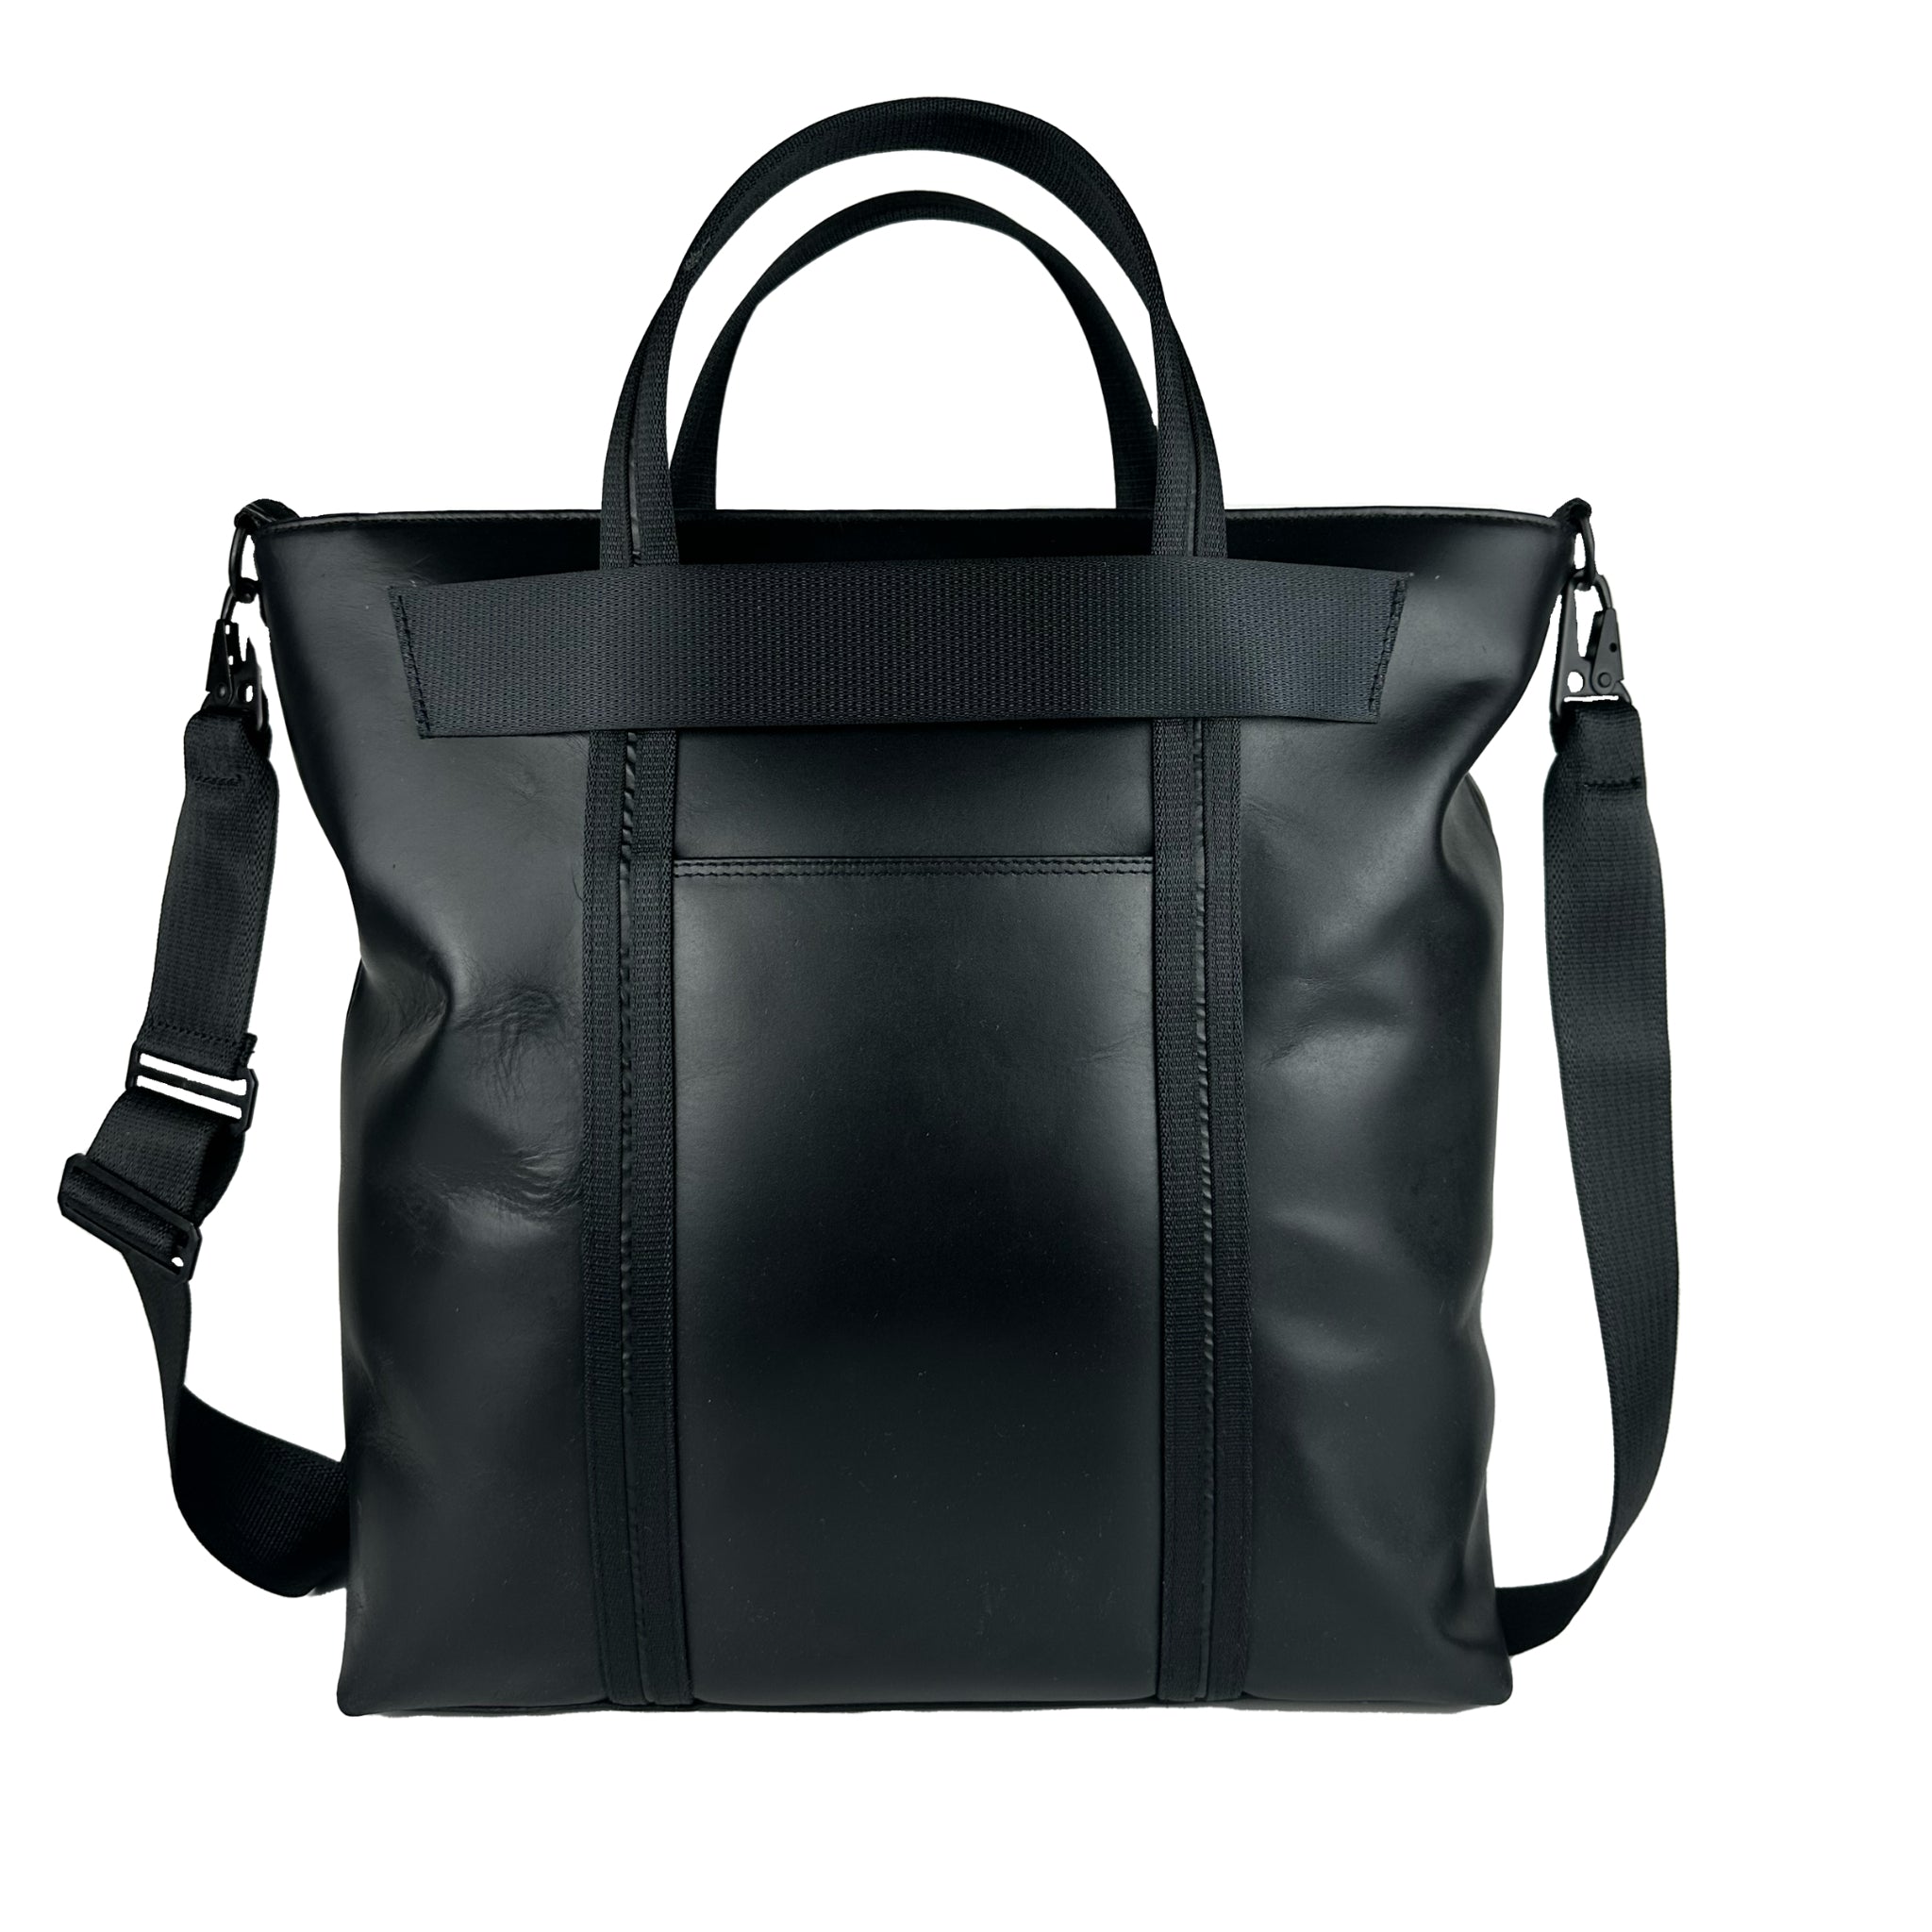 Back view of our work/office tote in black upcycled leather against a white background